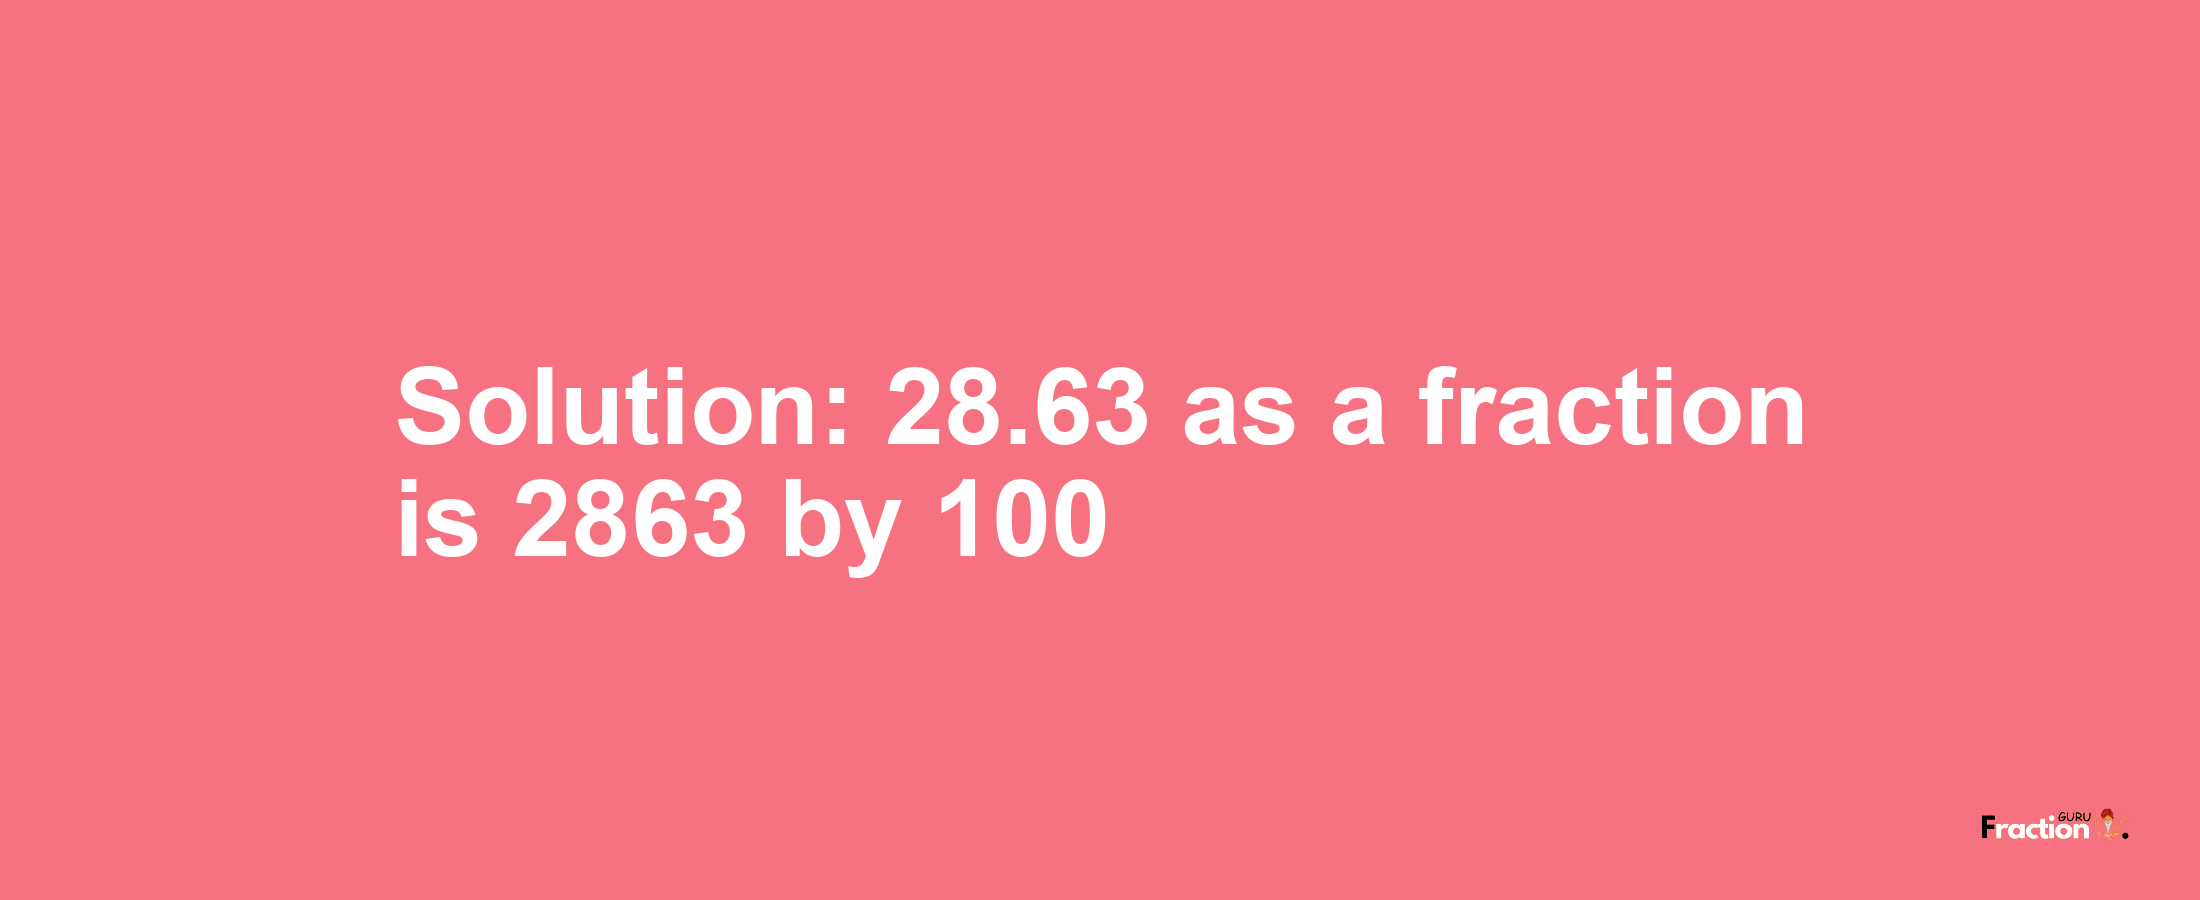 Solution:28.63 as a fraction is 2863/100